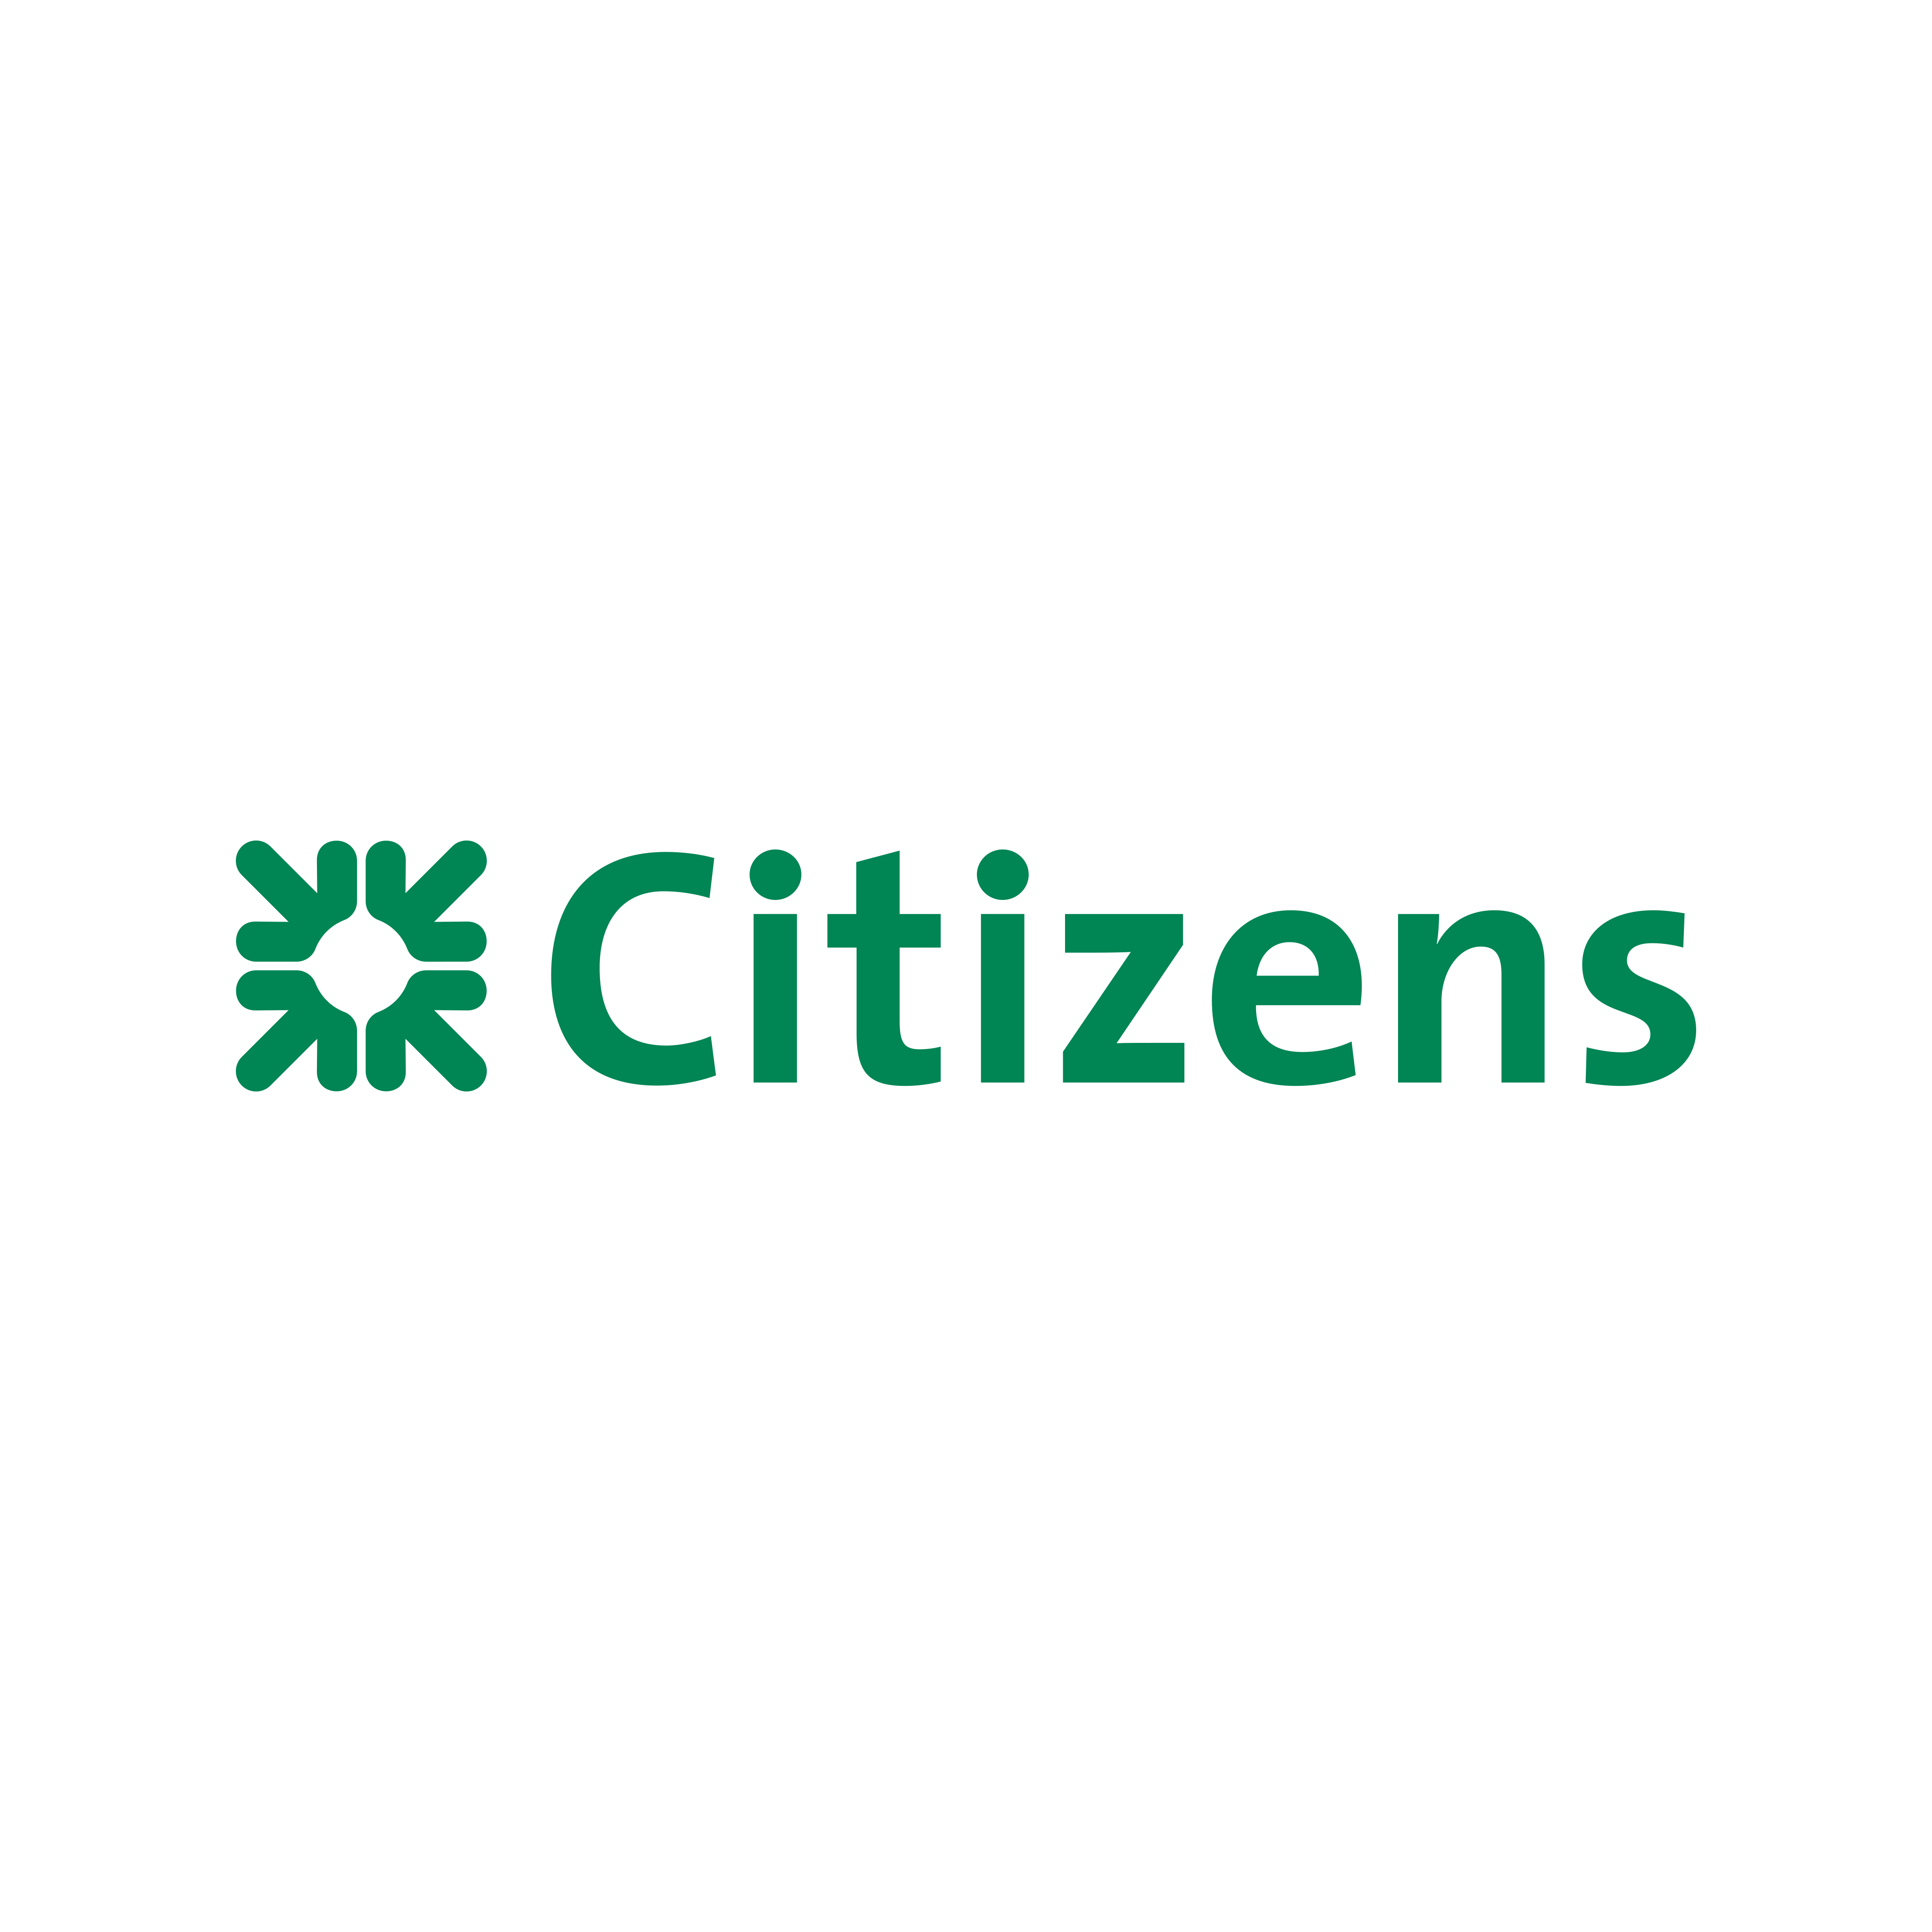 Citizens Logo PNG.